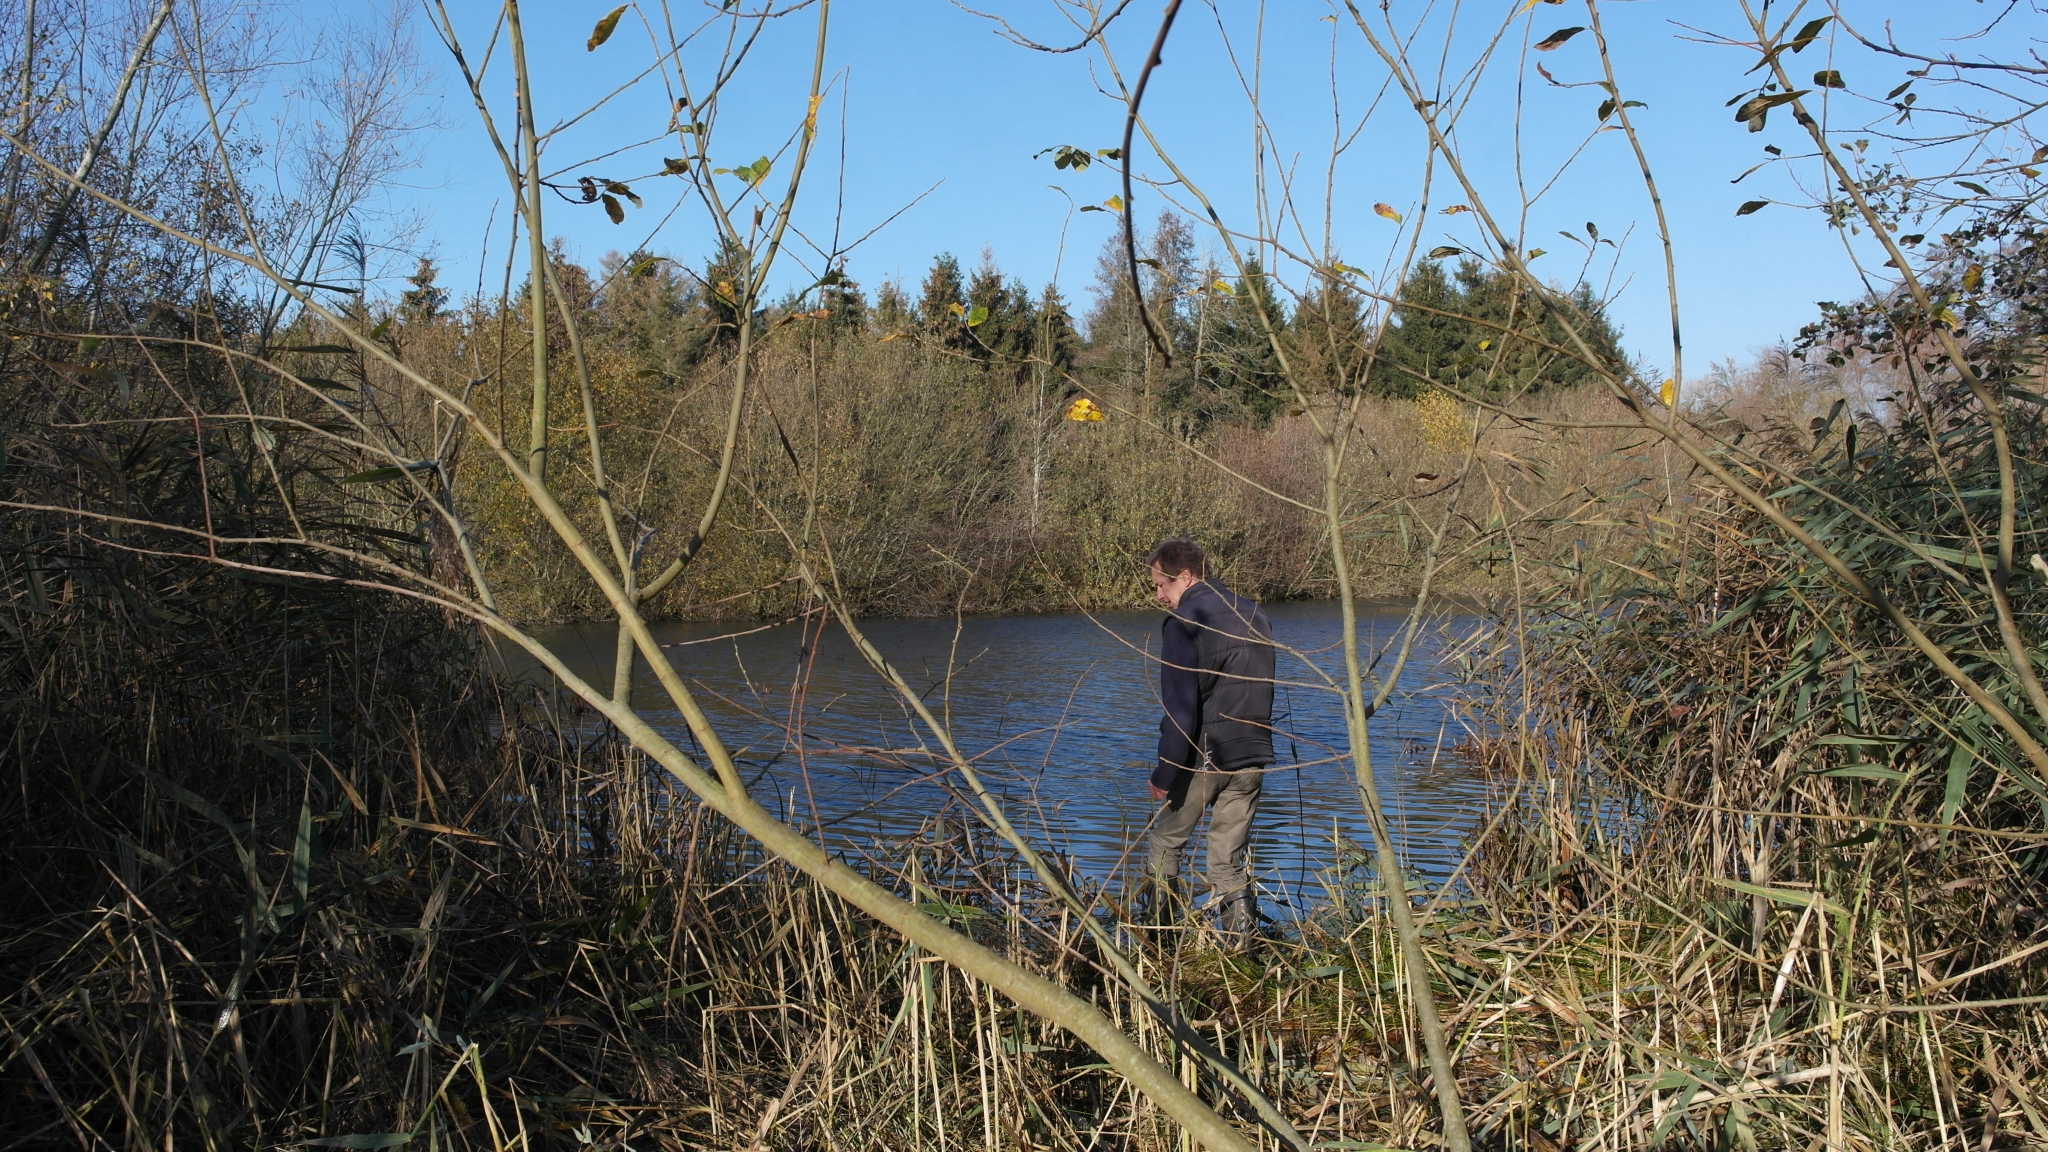 A photo from the FoTF Conservation Event - November 2018 - Undetaking clearance at the Lynford Lake Waters Edge : The team at work at the waters edge of Lynford Lake